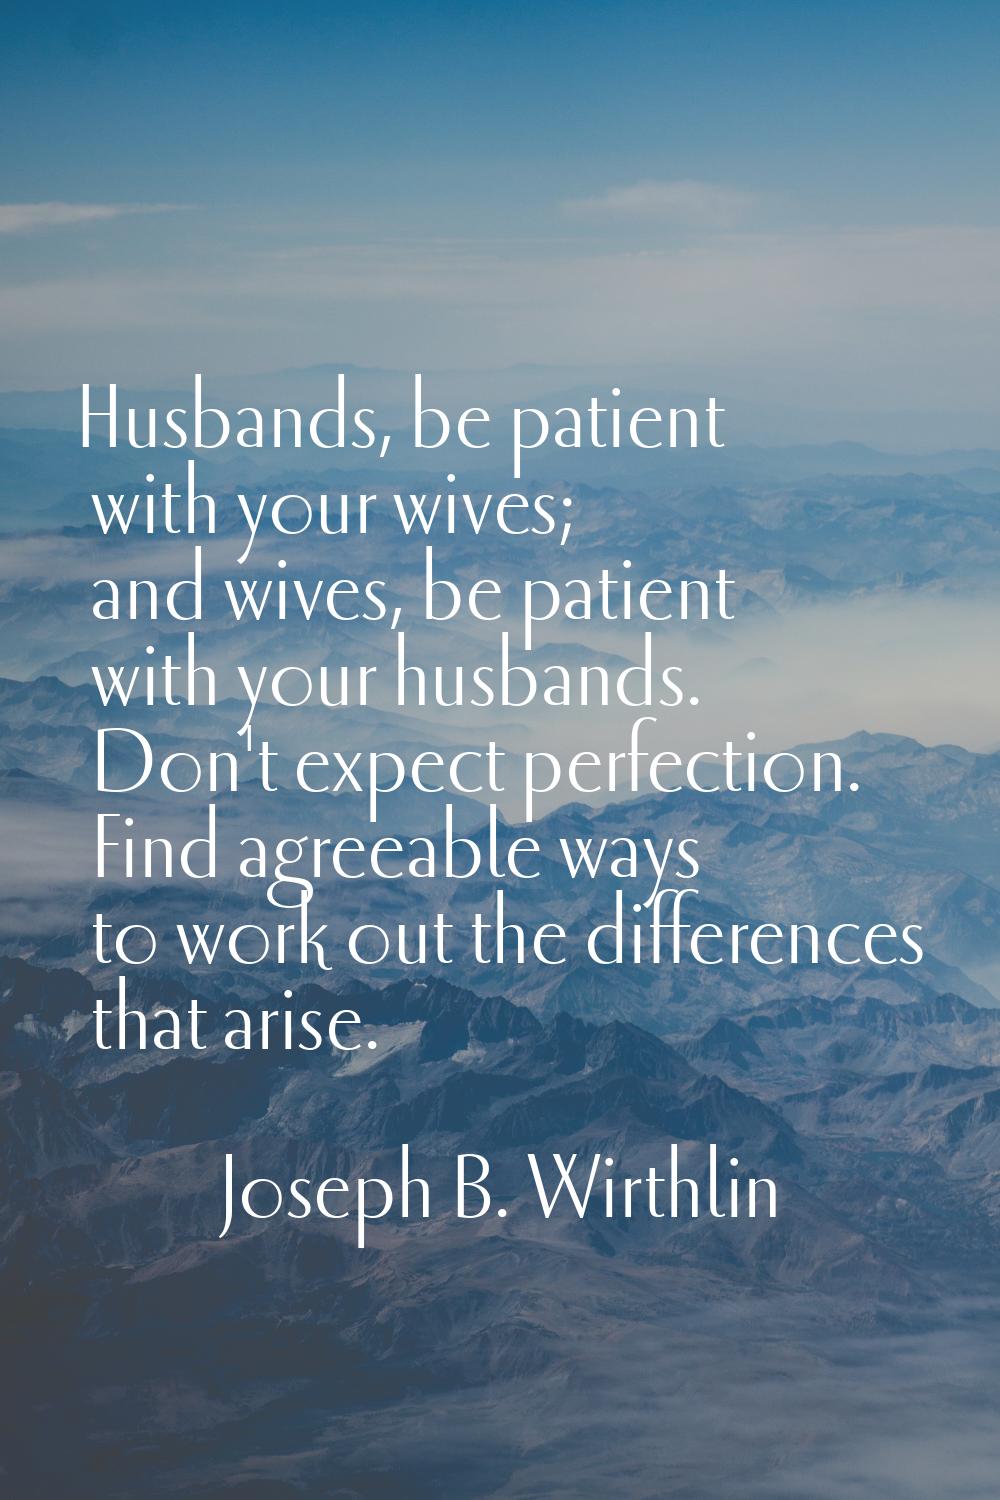 Husbands, be patient with your wives; and wives, be patient with your husbands. Don't expect perfec